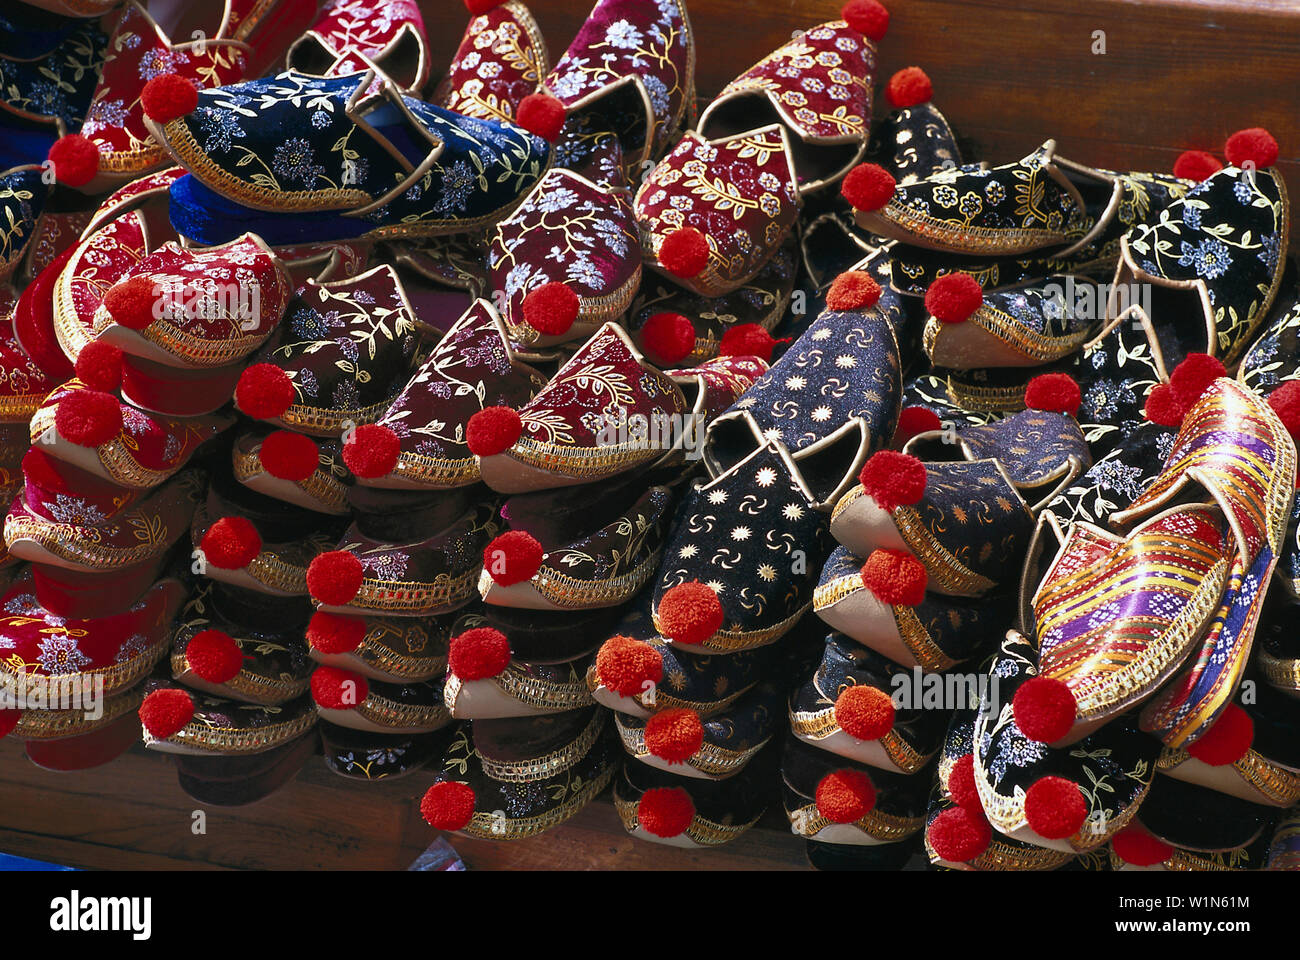 Shoes Istanbul Turkey High Resolution 